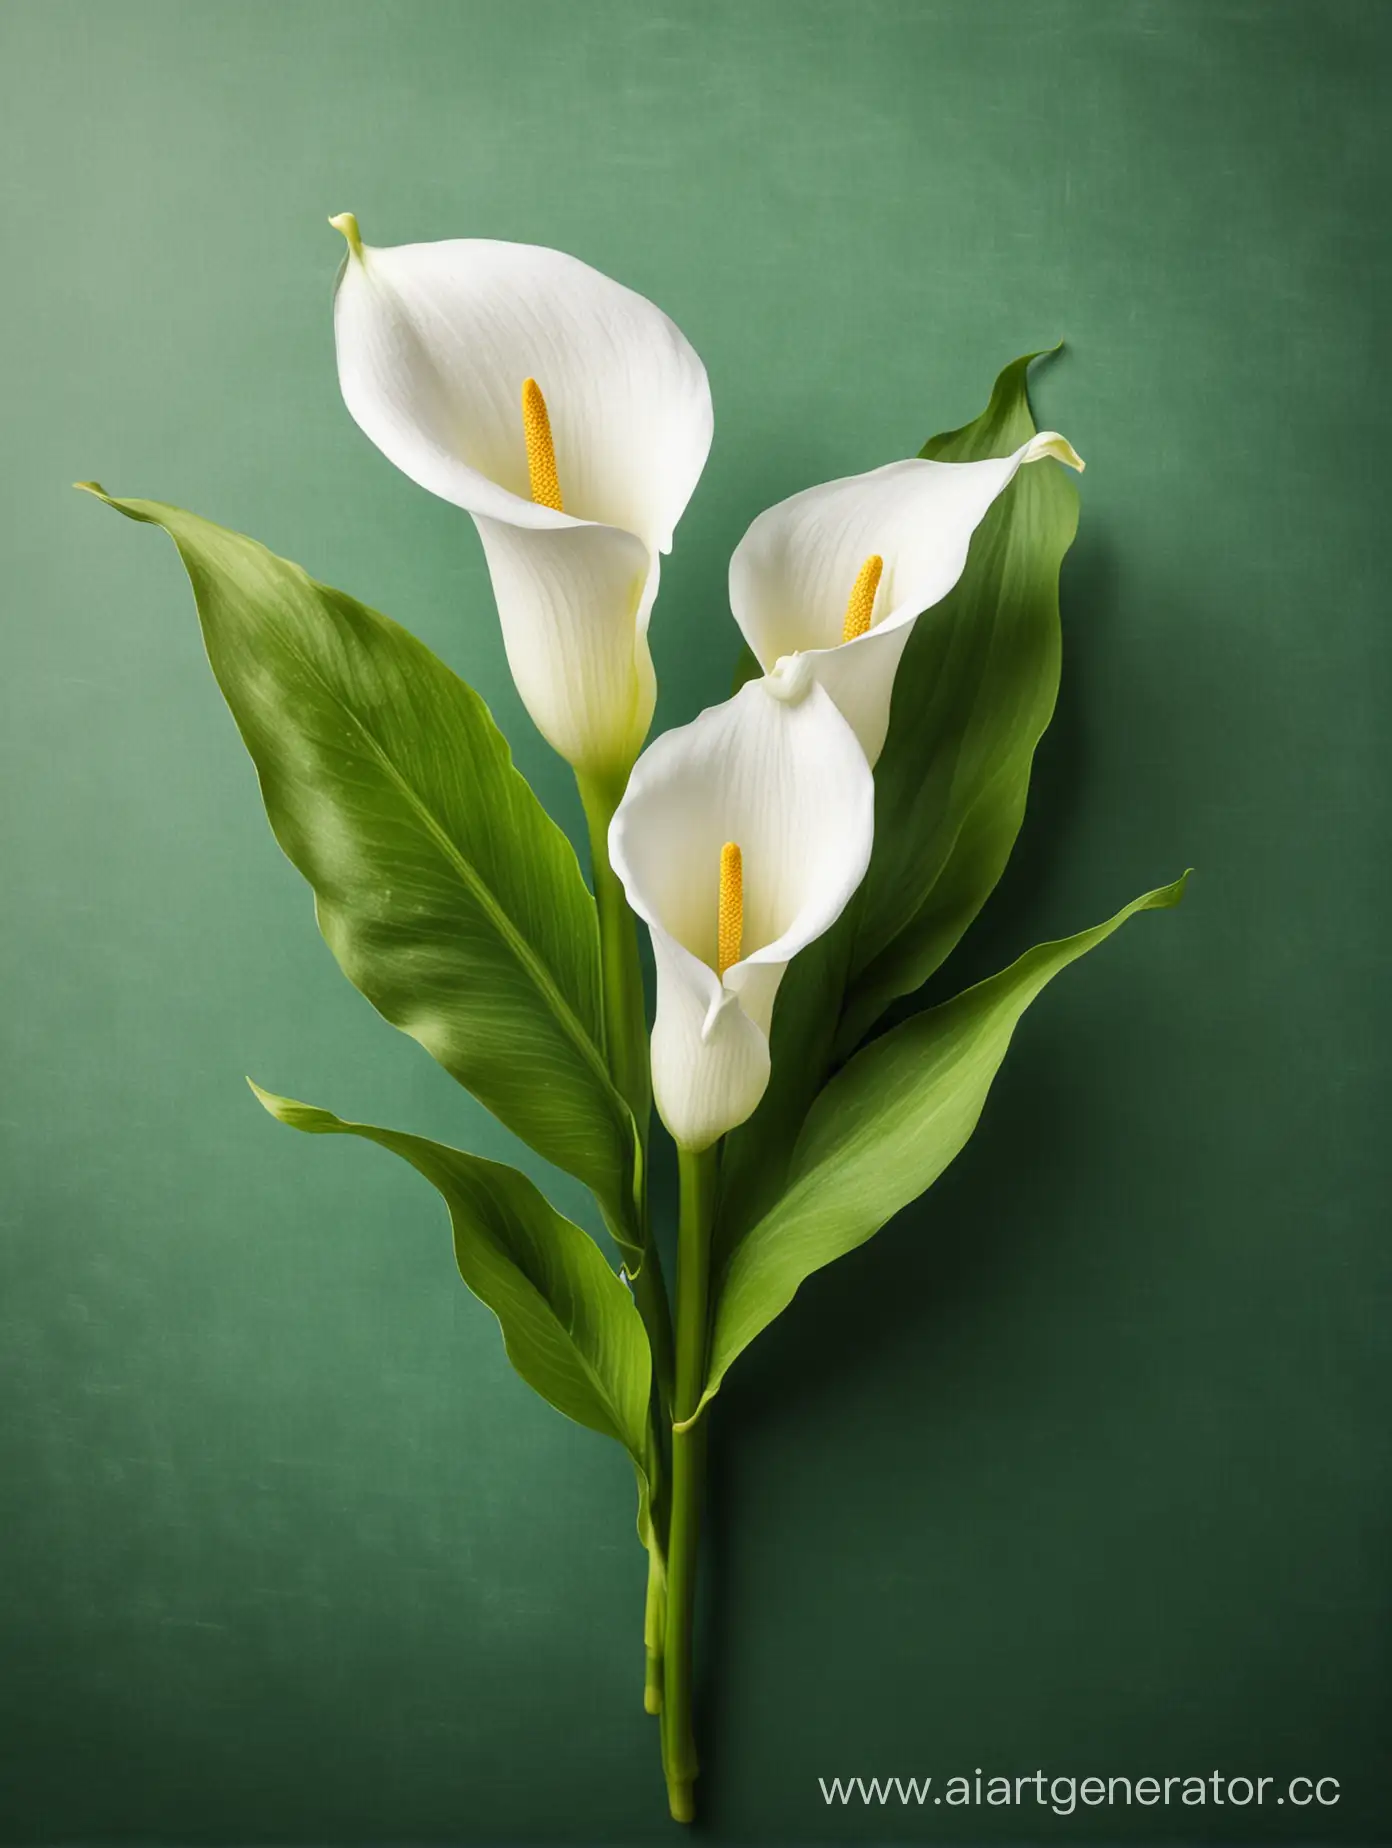 Vibrant-Calla-Lily-Flower-on-Green-Background